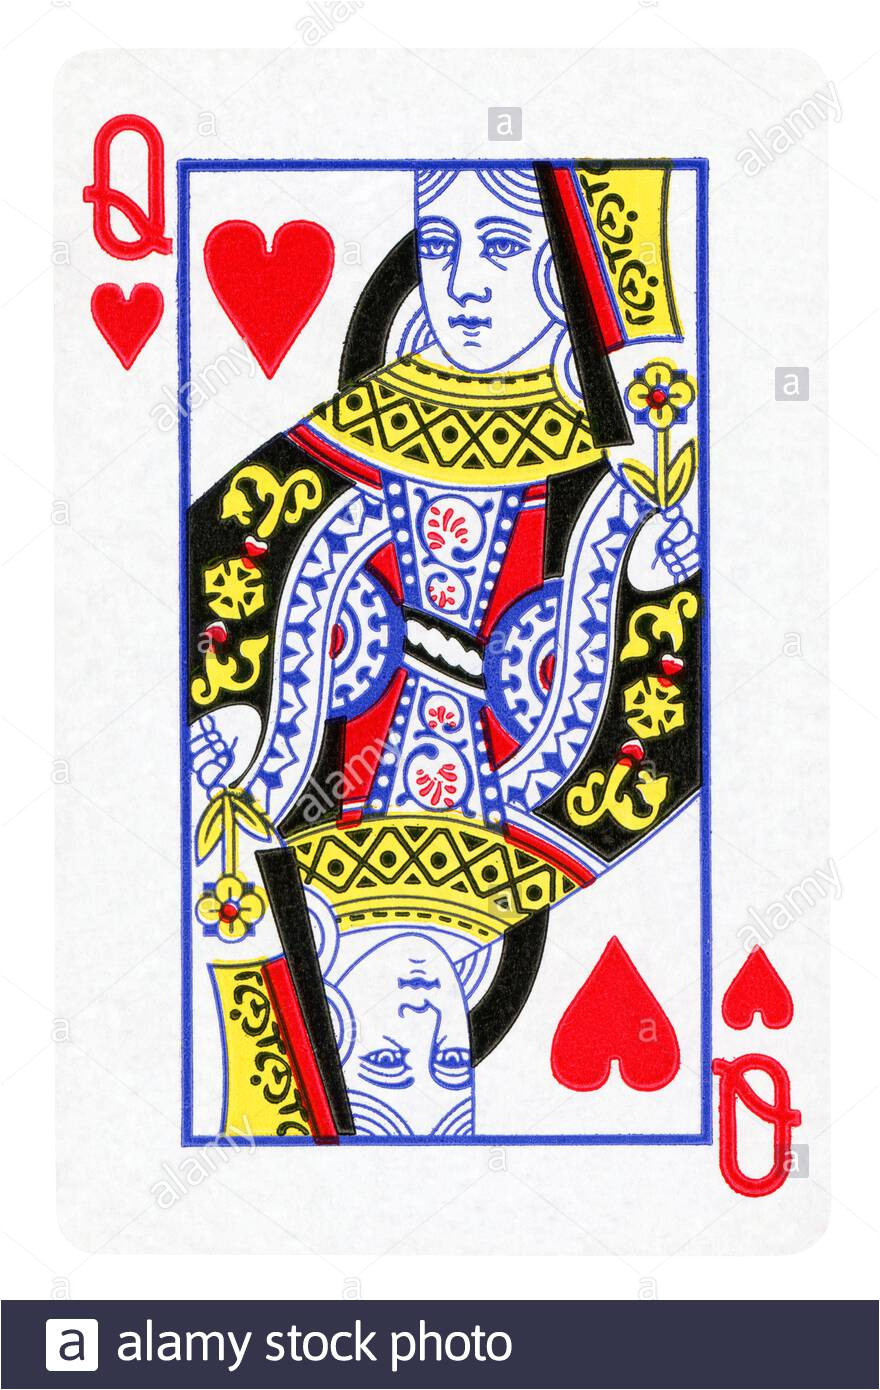 queen of hearts vintage playing card isolated on white clipping path included 2axwweb jpg